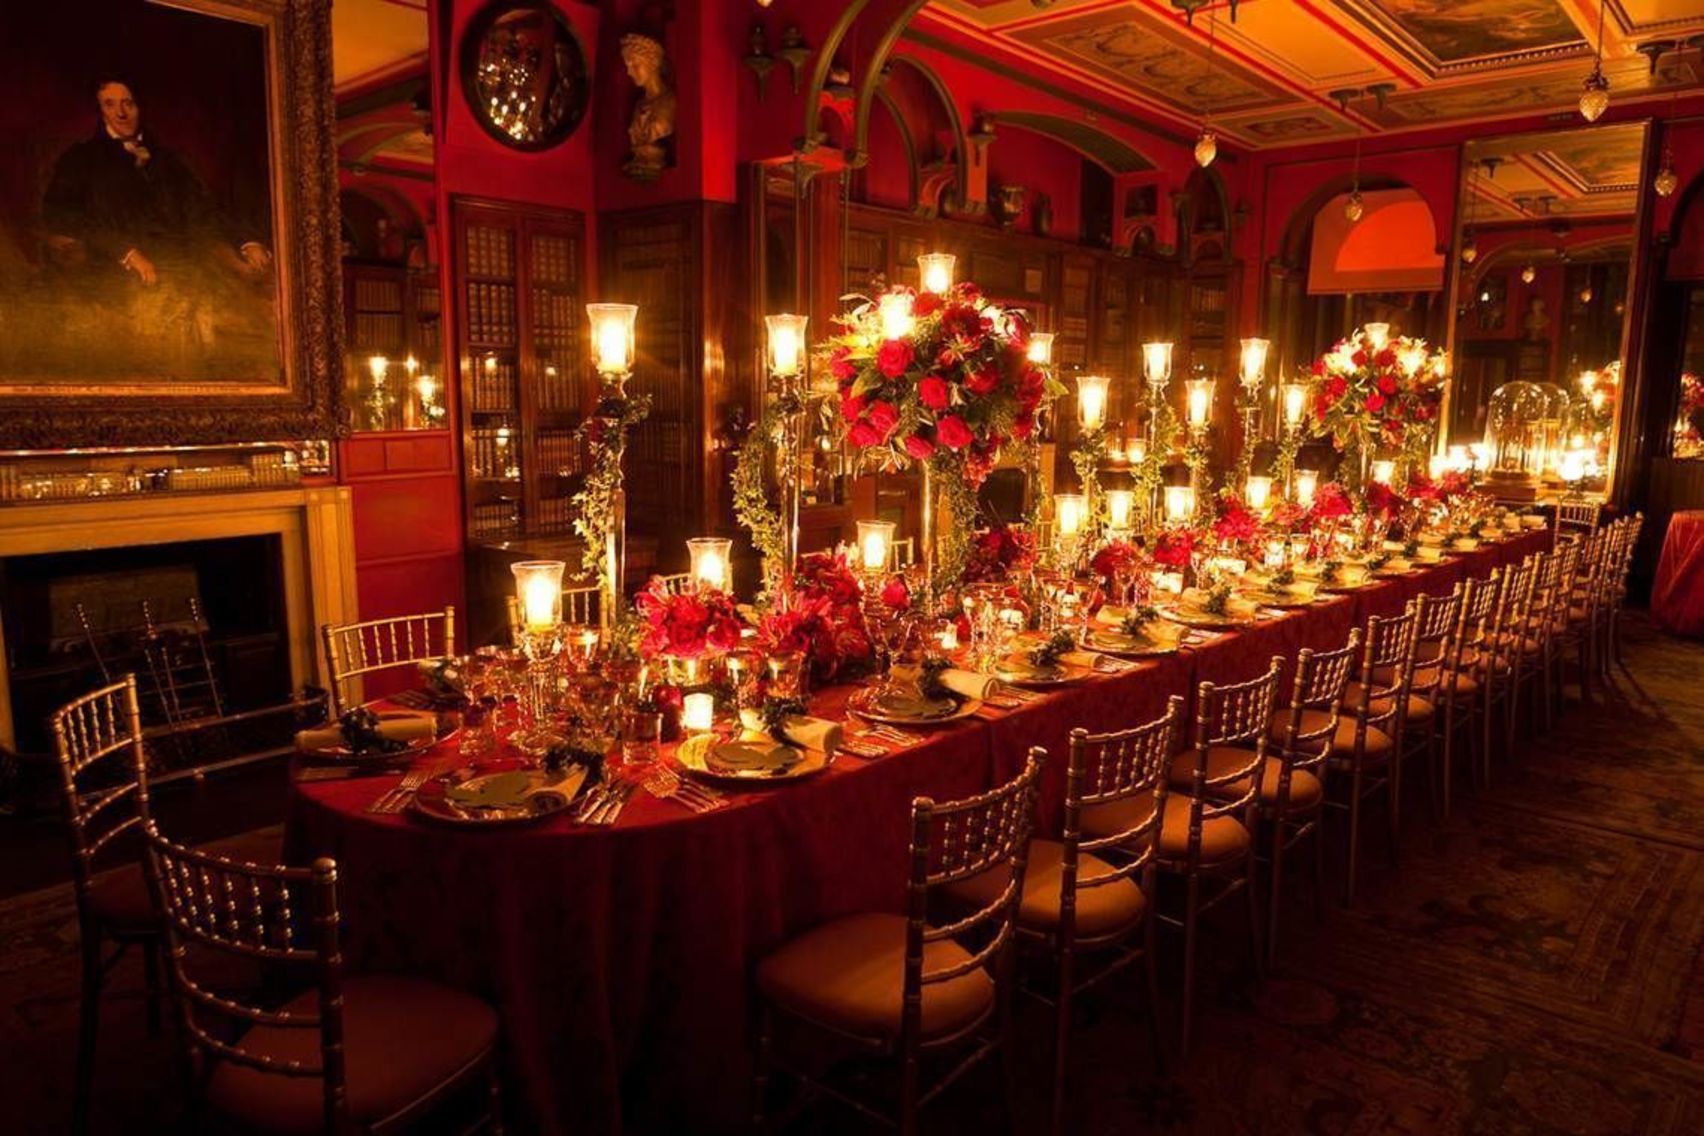 The Best Unique Private Dining Rooms London has to Offer